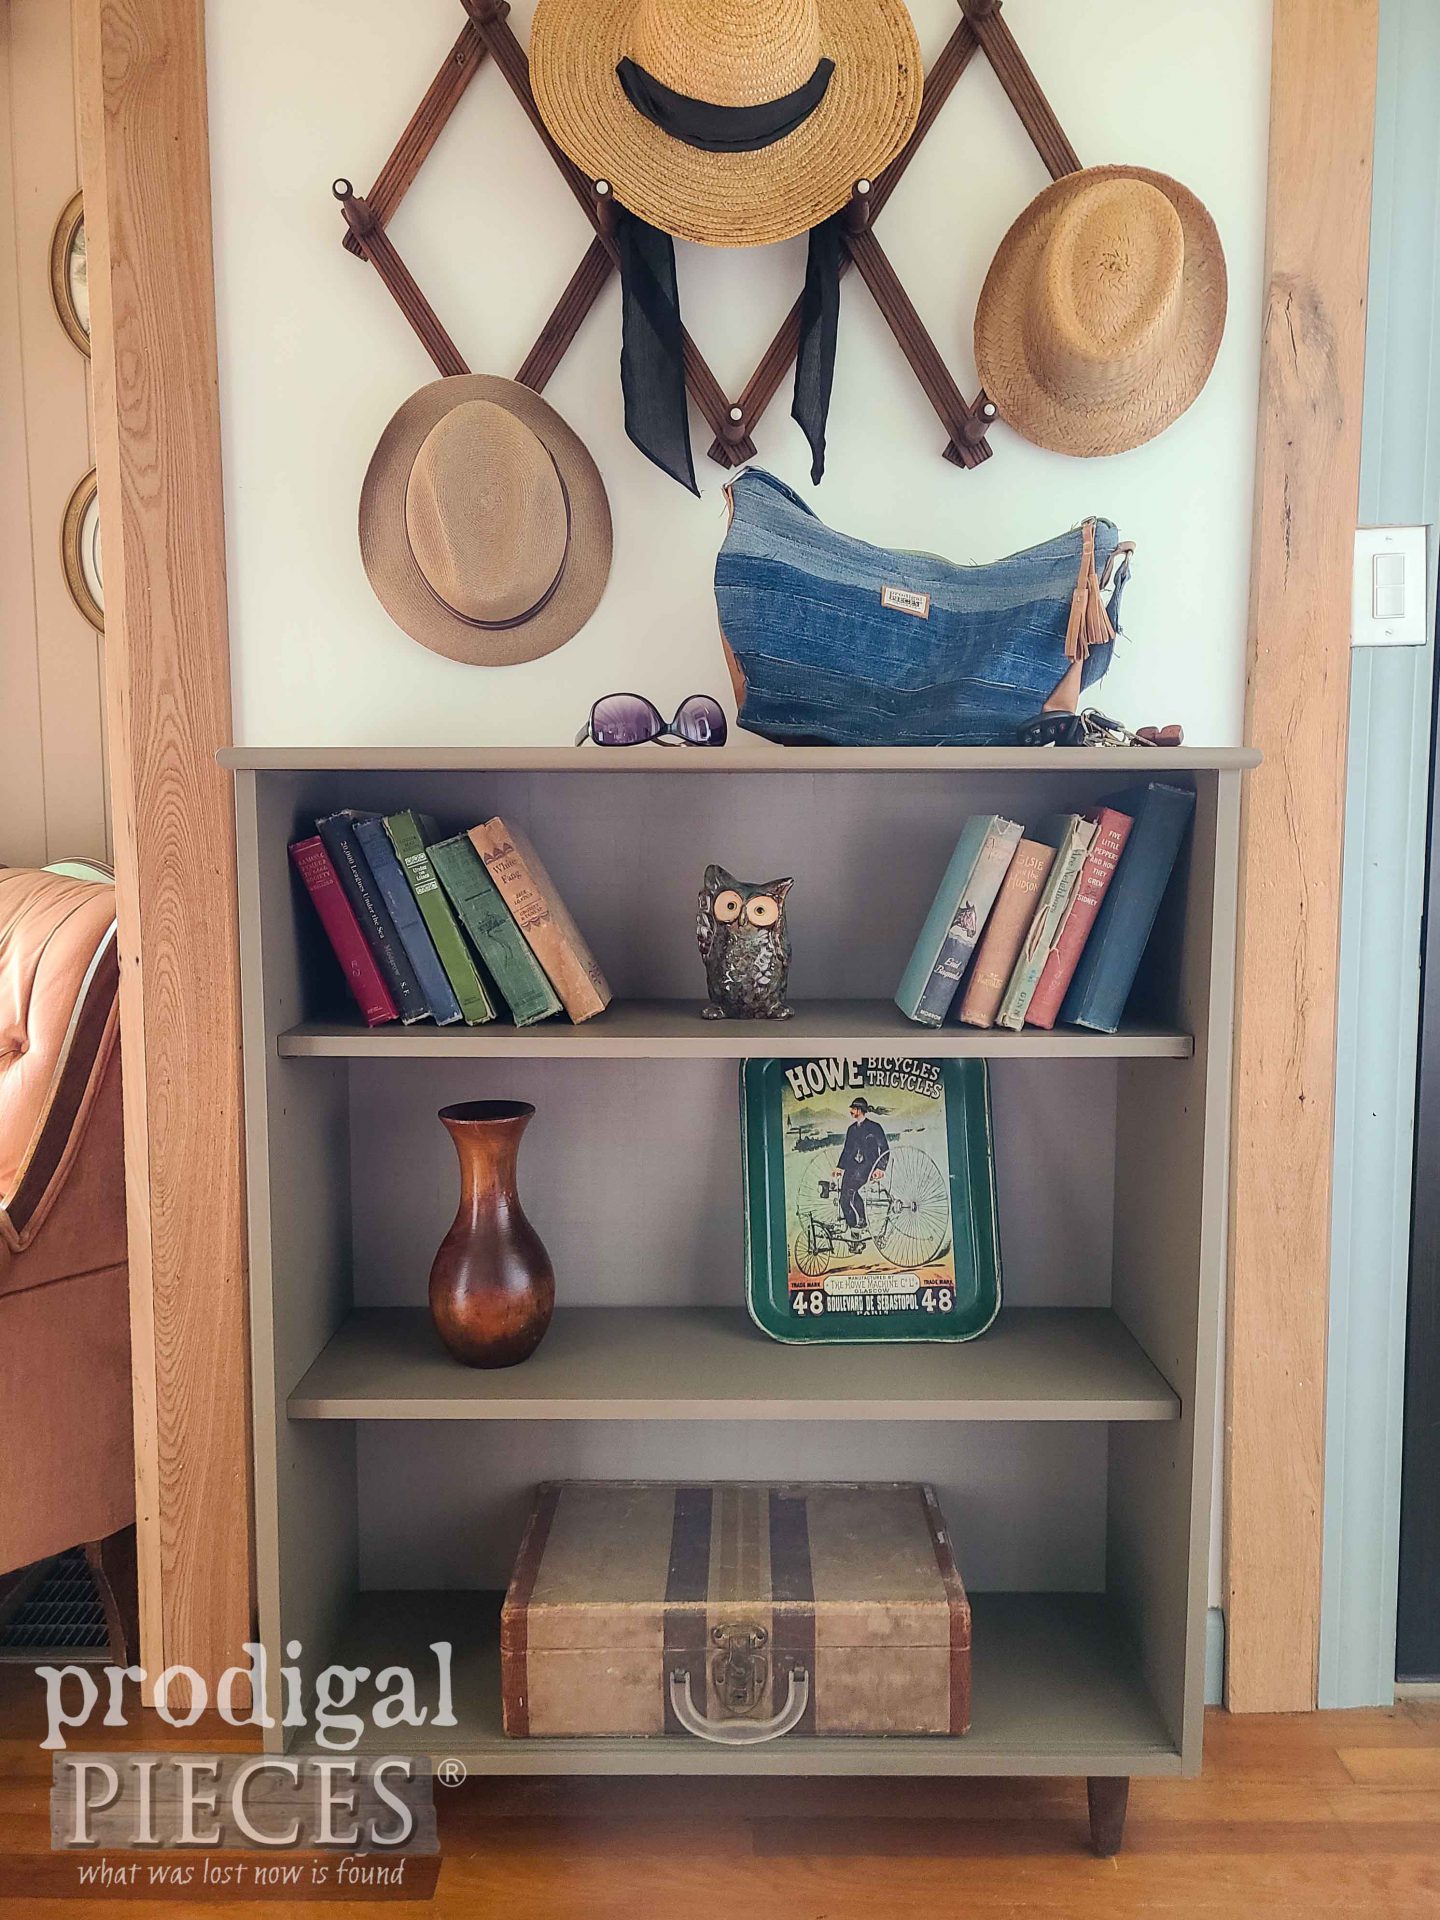 Vintage Mid Century Modern Bookcase with Fresh New Look by Larissa of Prodigal Pieces | prodigalpieces.com #prodigalpieces #vintage #midcentury #boho